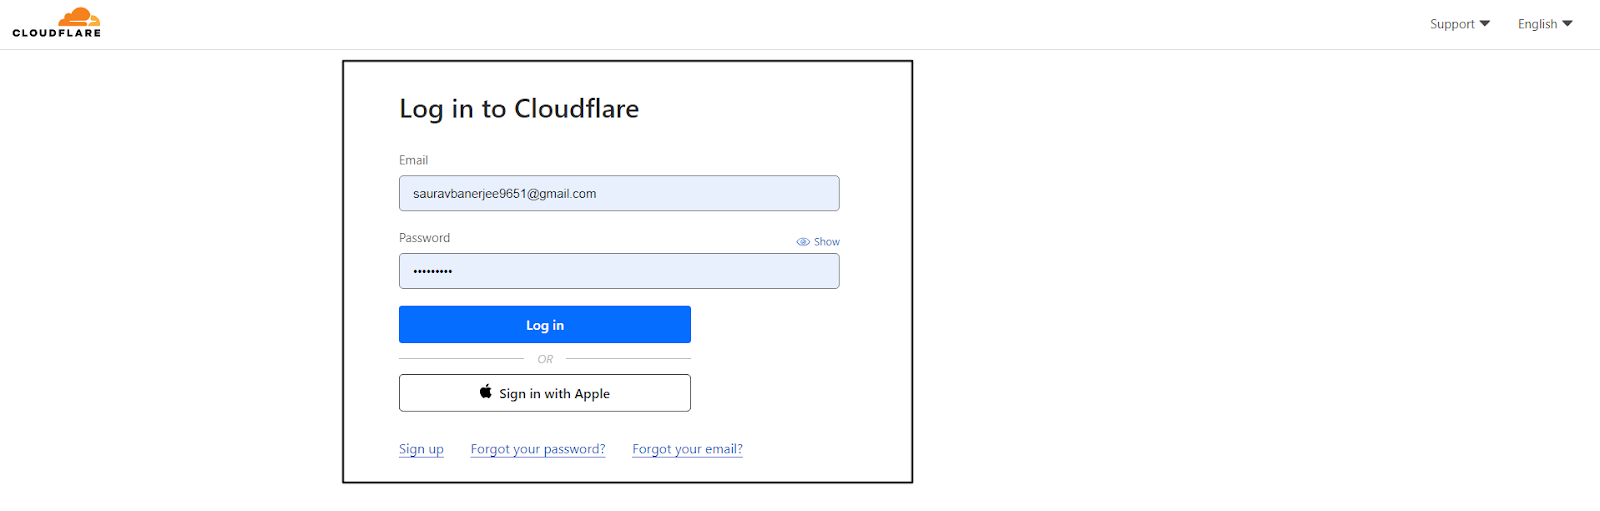 Cloudflare and log in to your account